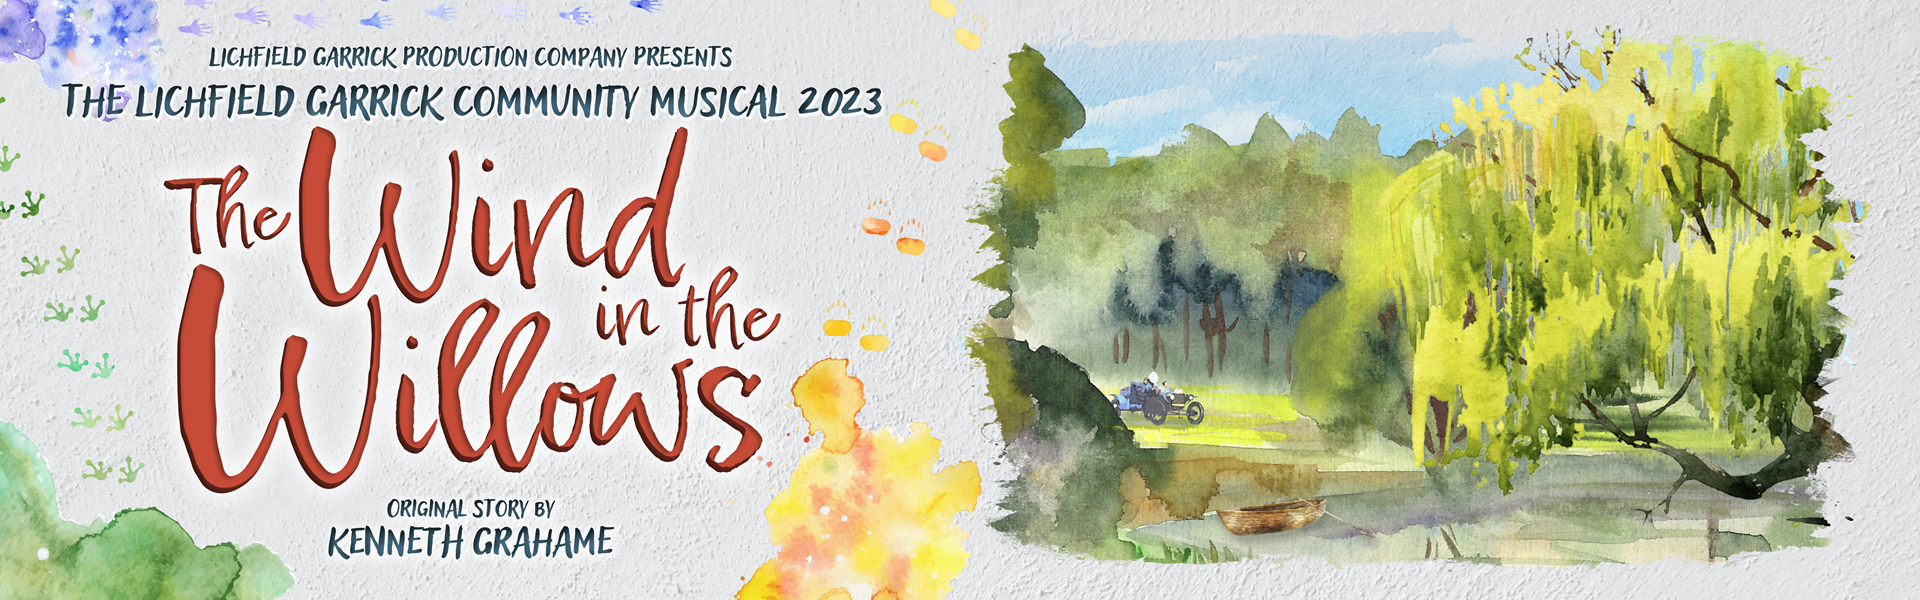 The Wind in the Willows (2023 Community Musical)